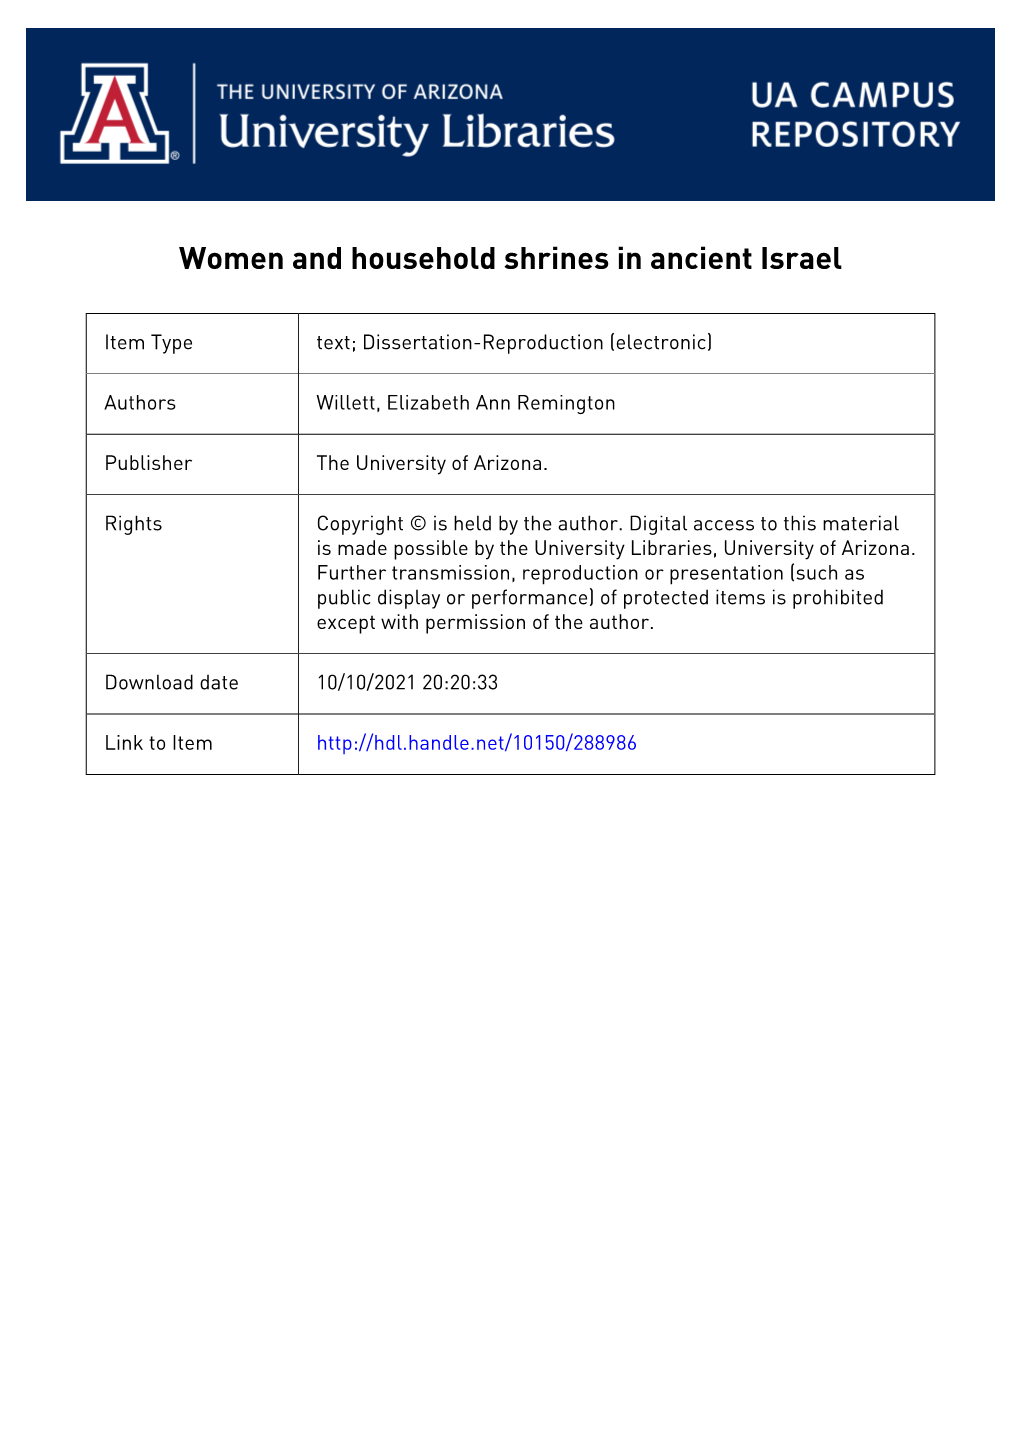 Women and Household Shrines in Ancient Israel